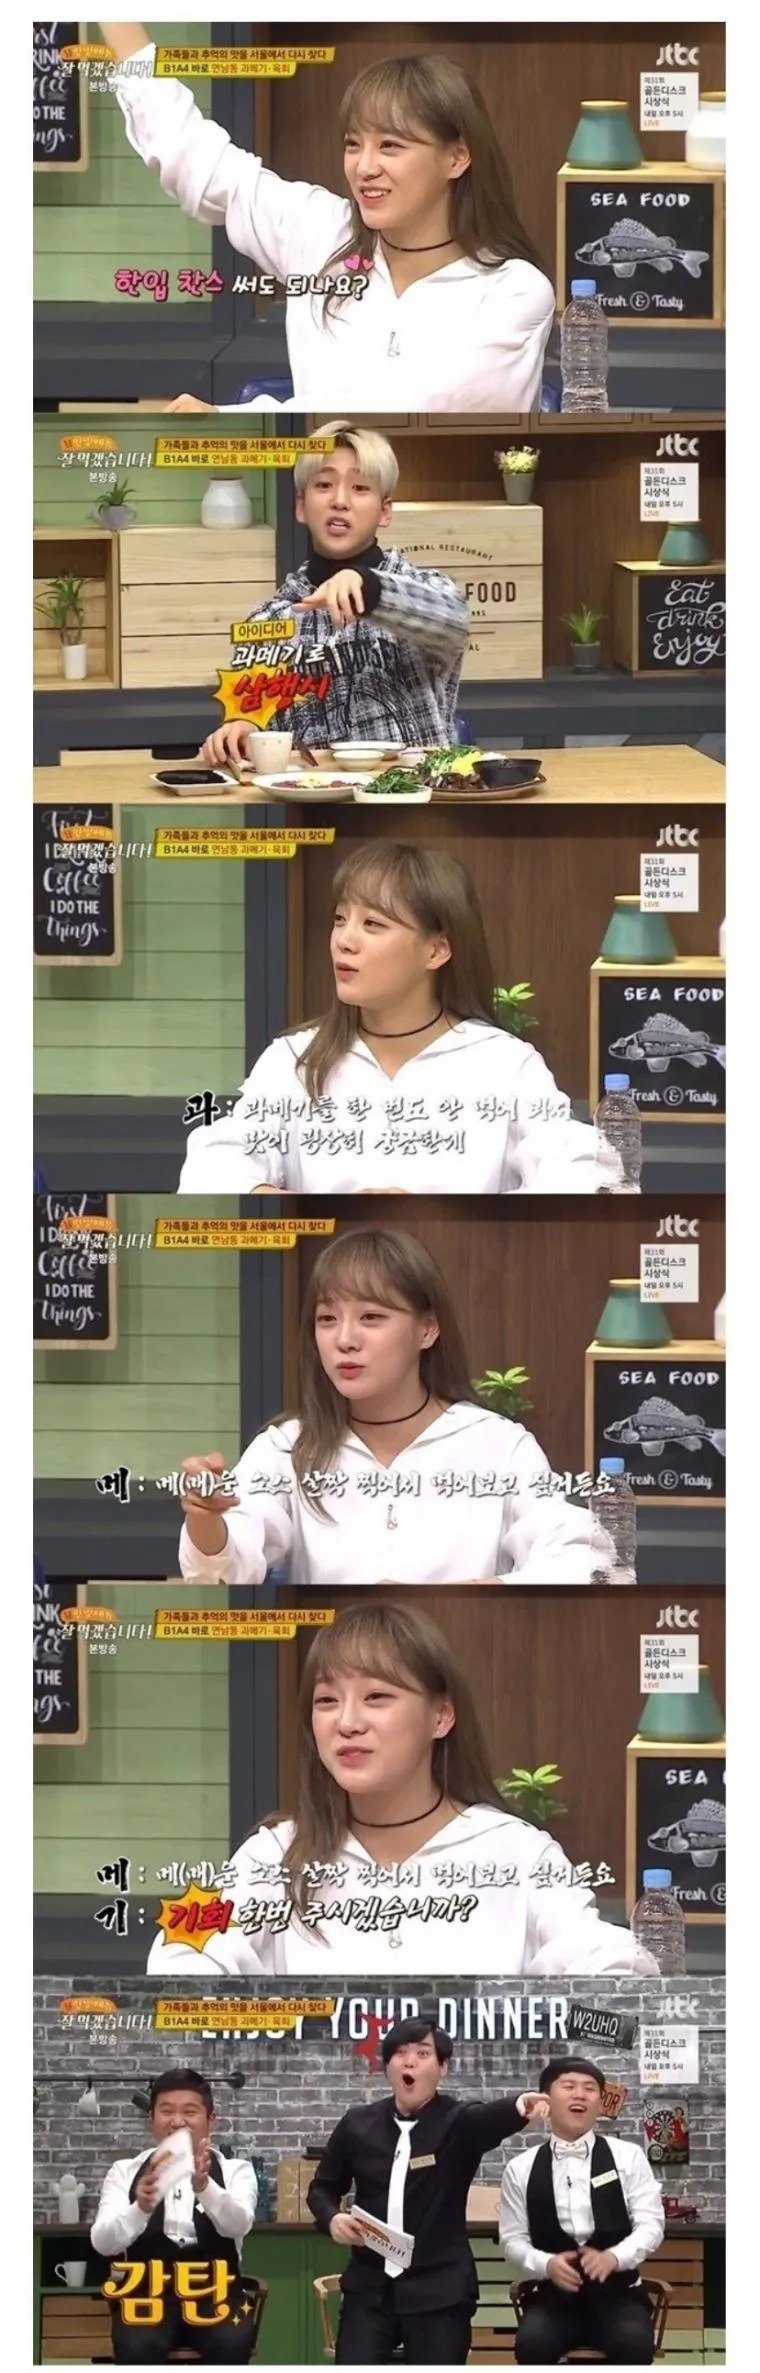 Kim Sejeong, the interview free pass award with a good sense.jpg